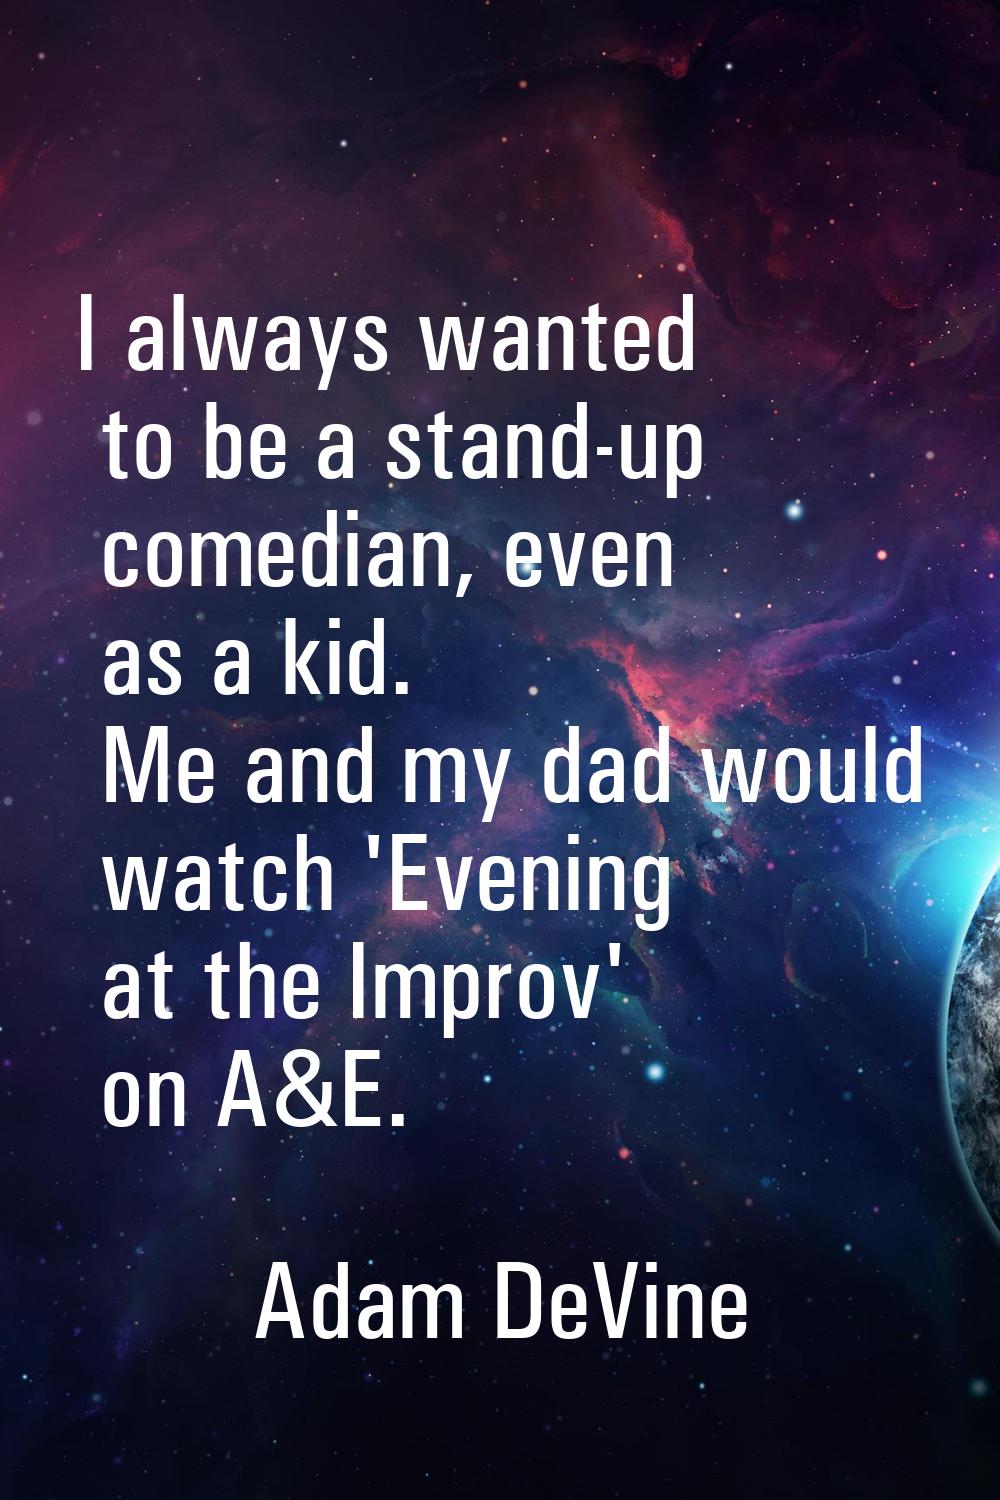 I always wanted to be a stand-up comedian, even as a kid. Me and my dad would watch 'Evening at the